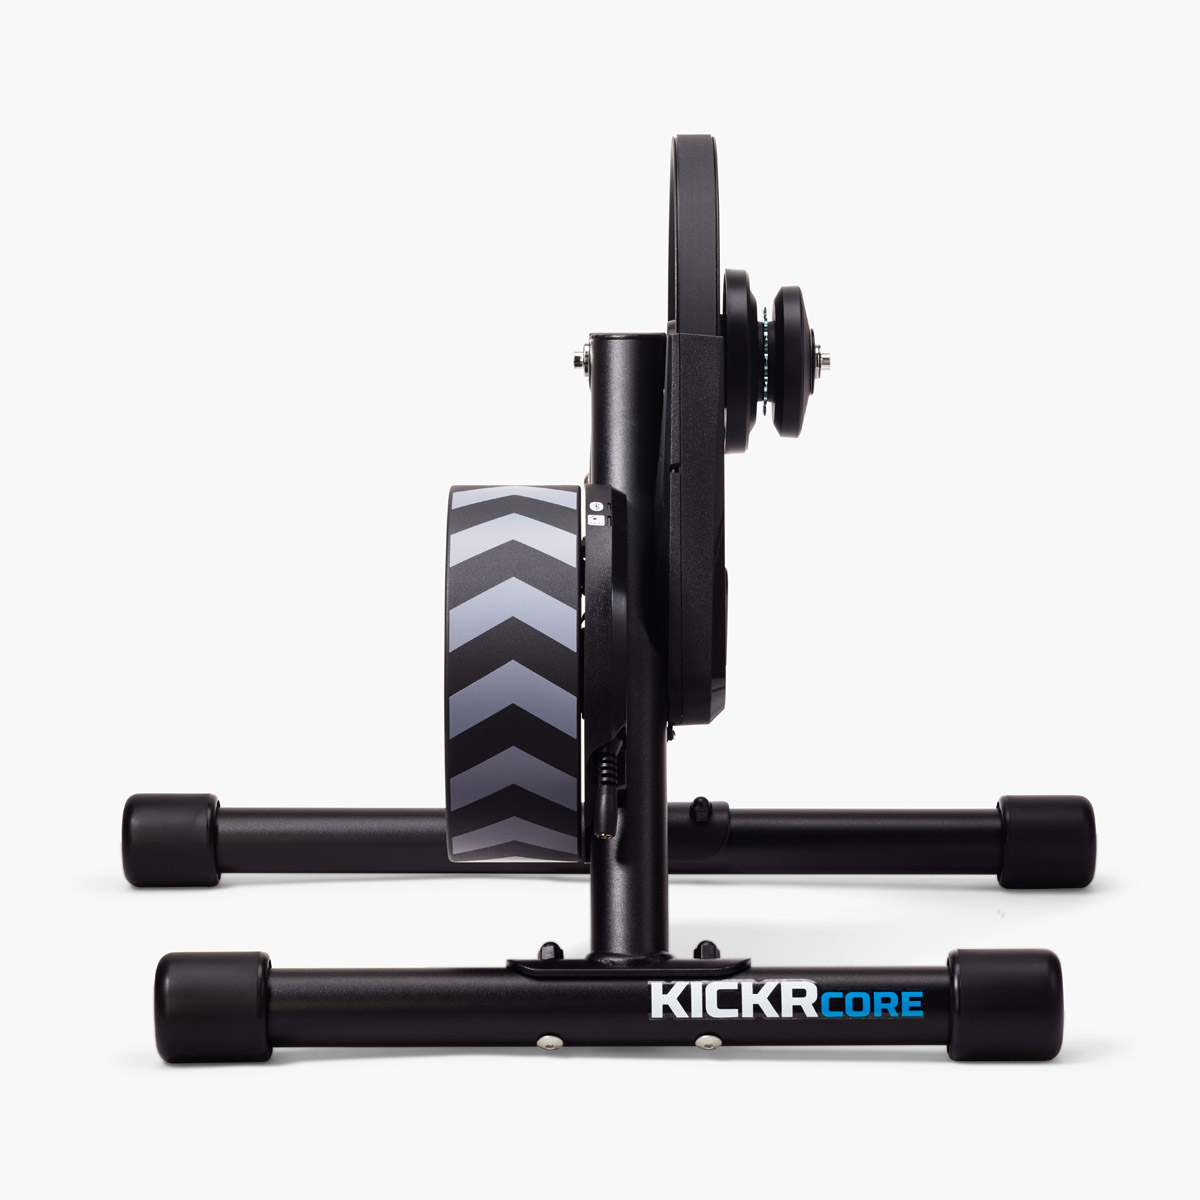 Wahoo KICKR CORE Zwift One Smart Trainer Announced